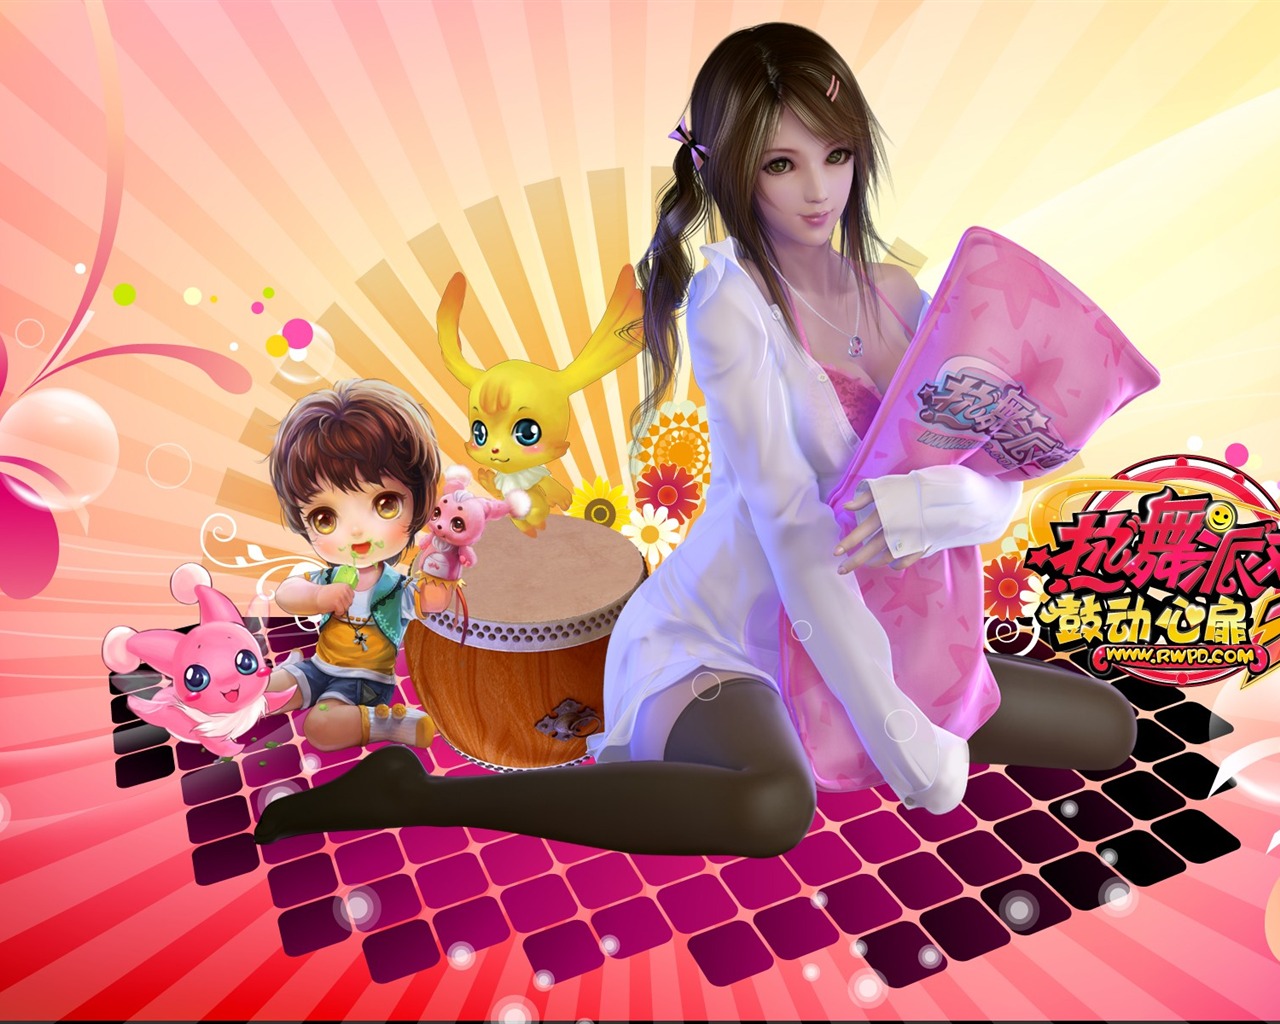 Online game Hot Dance Party II official wallpapers #23 - 1280x1024